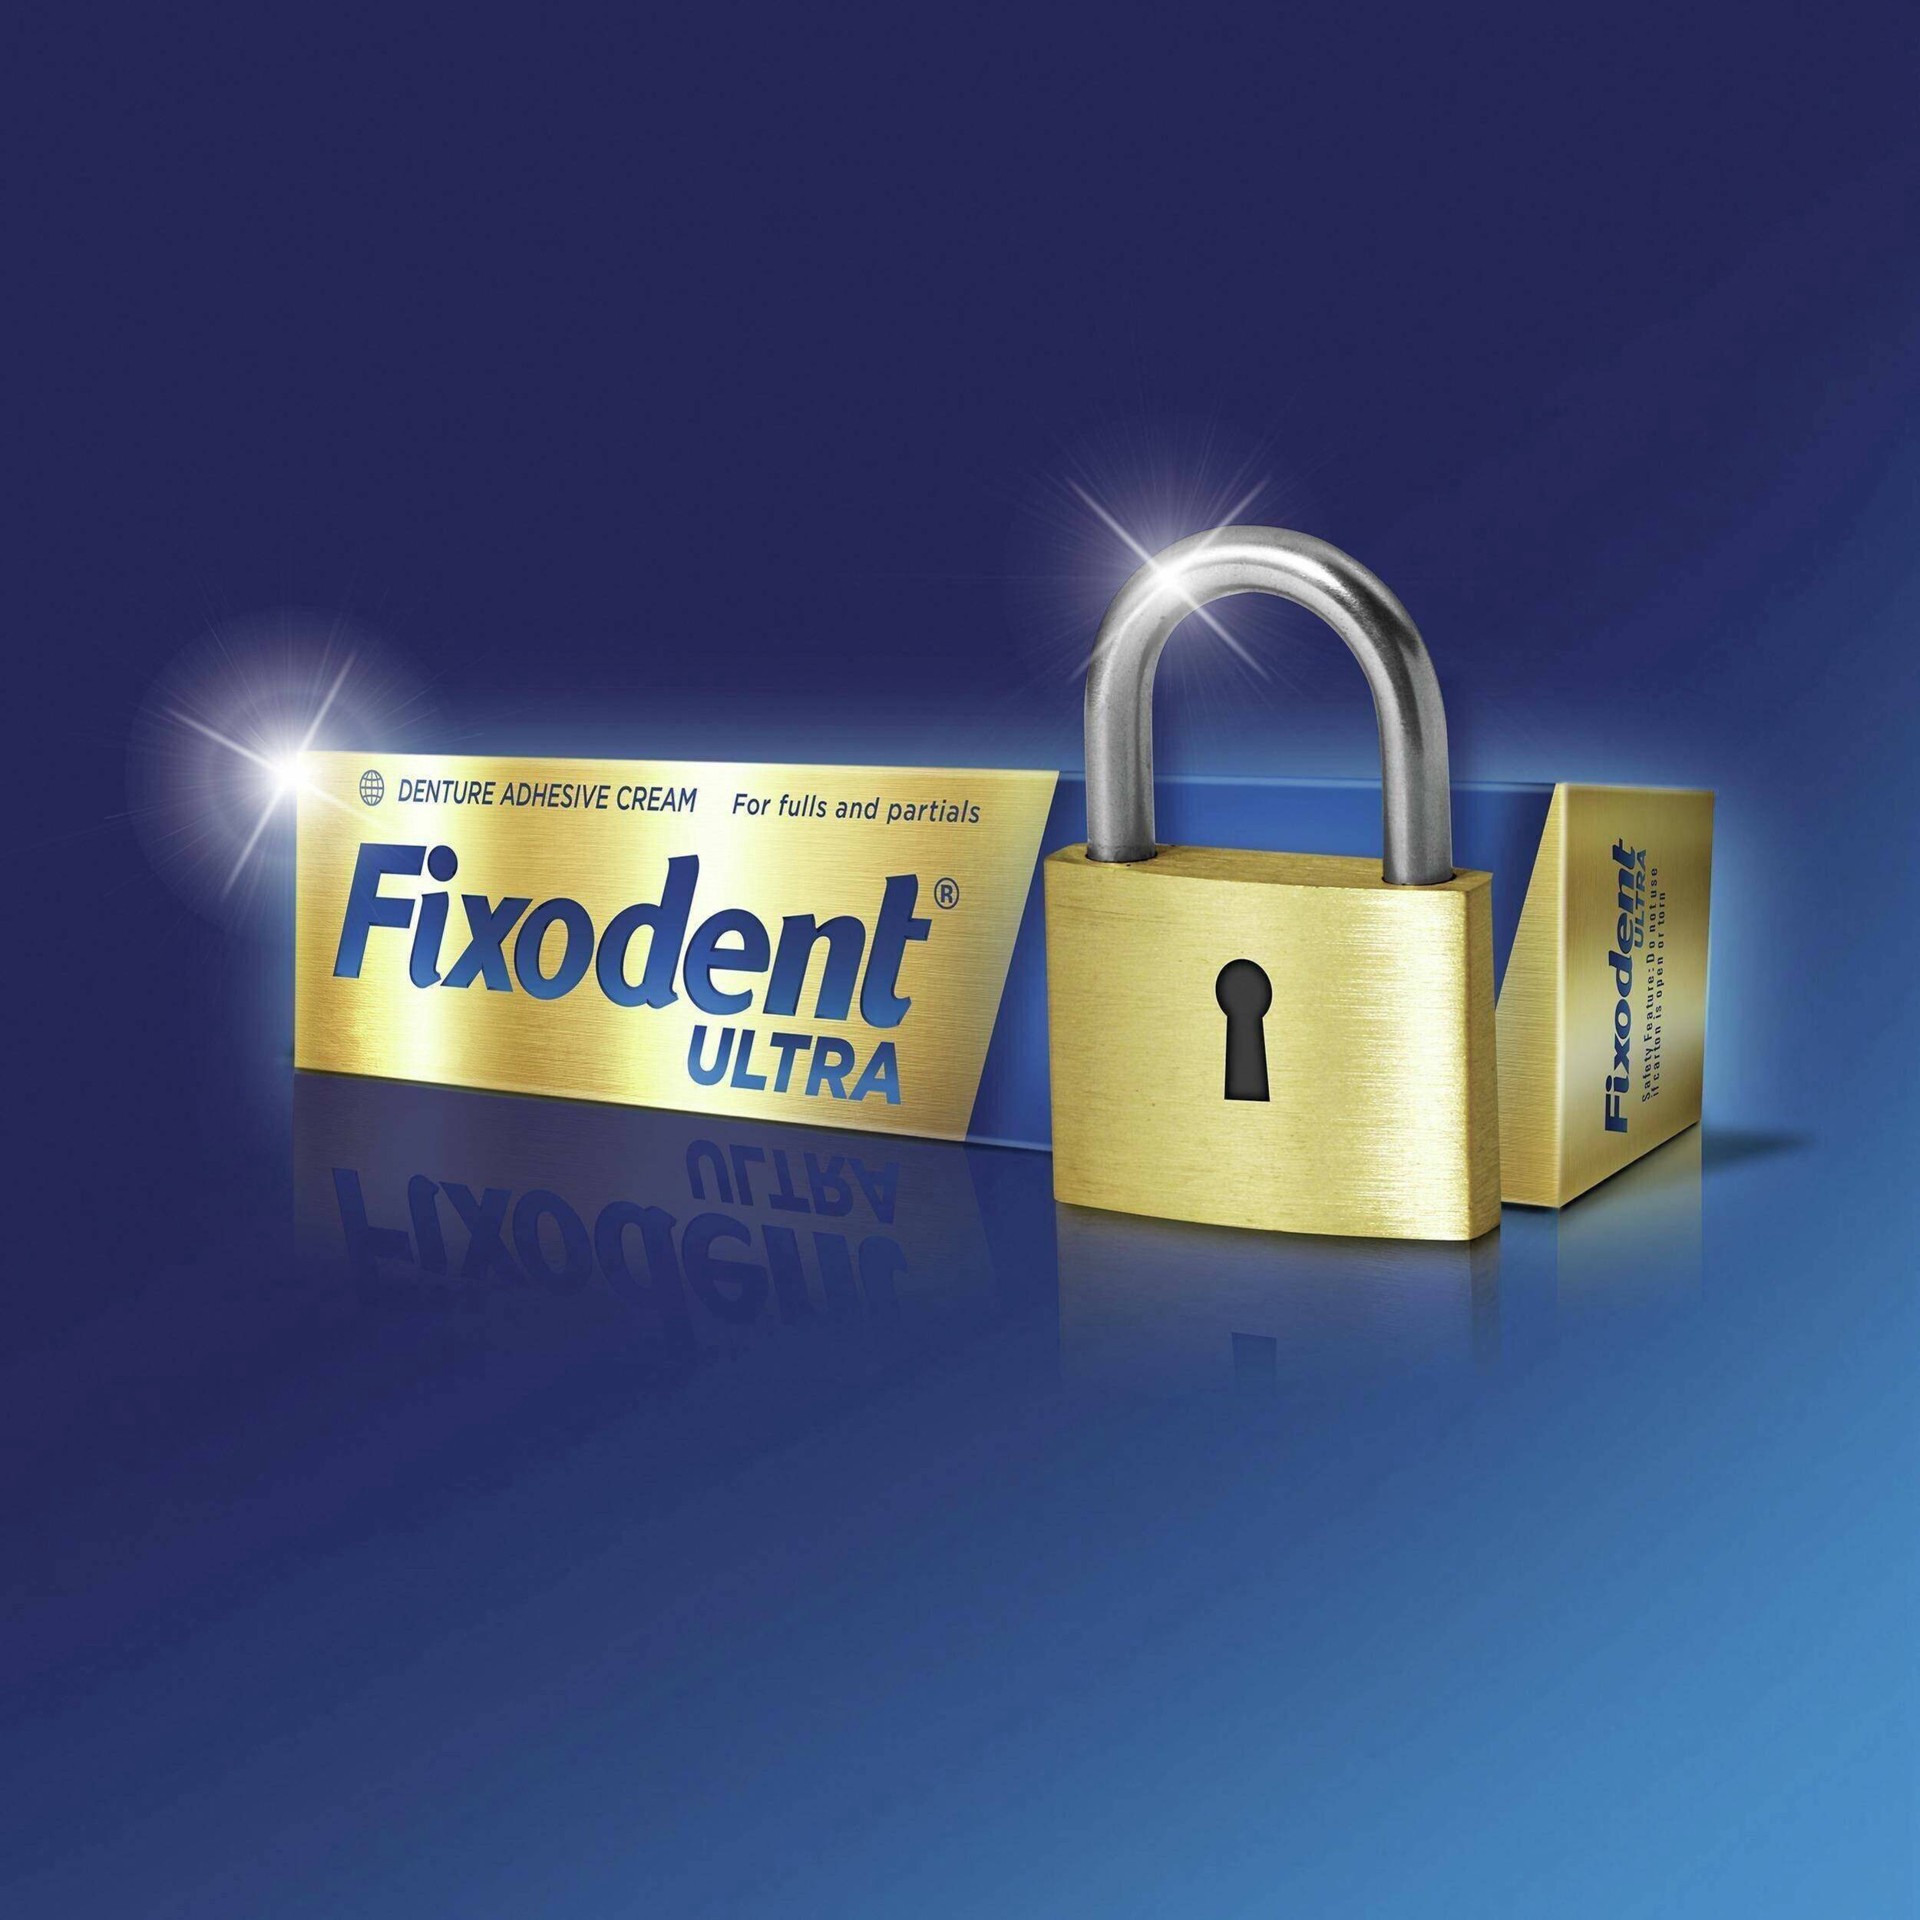 FIXODENT Fixodent Ultra Max Hold Secure Denture Adhesive 2.2oz